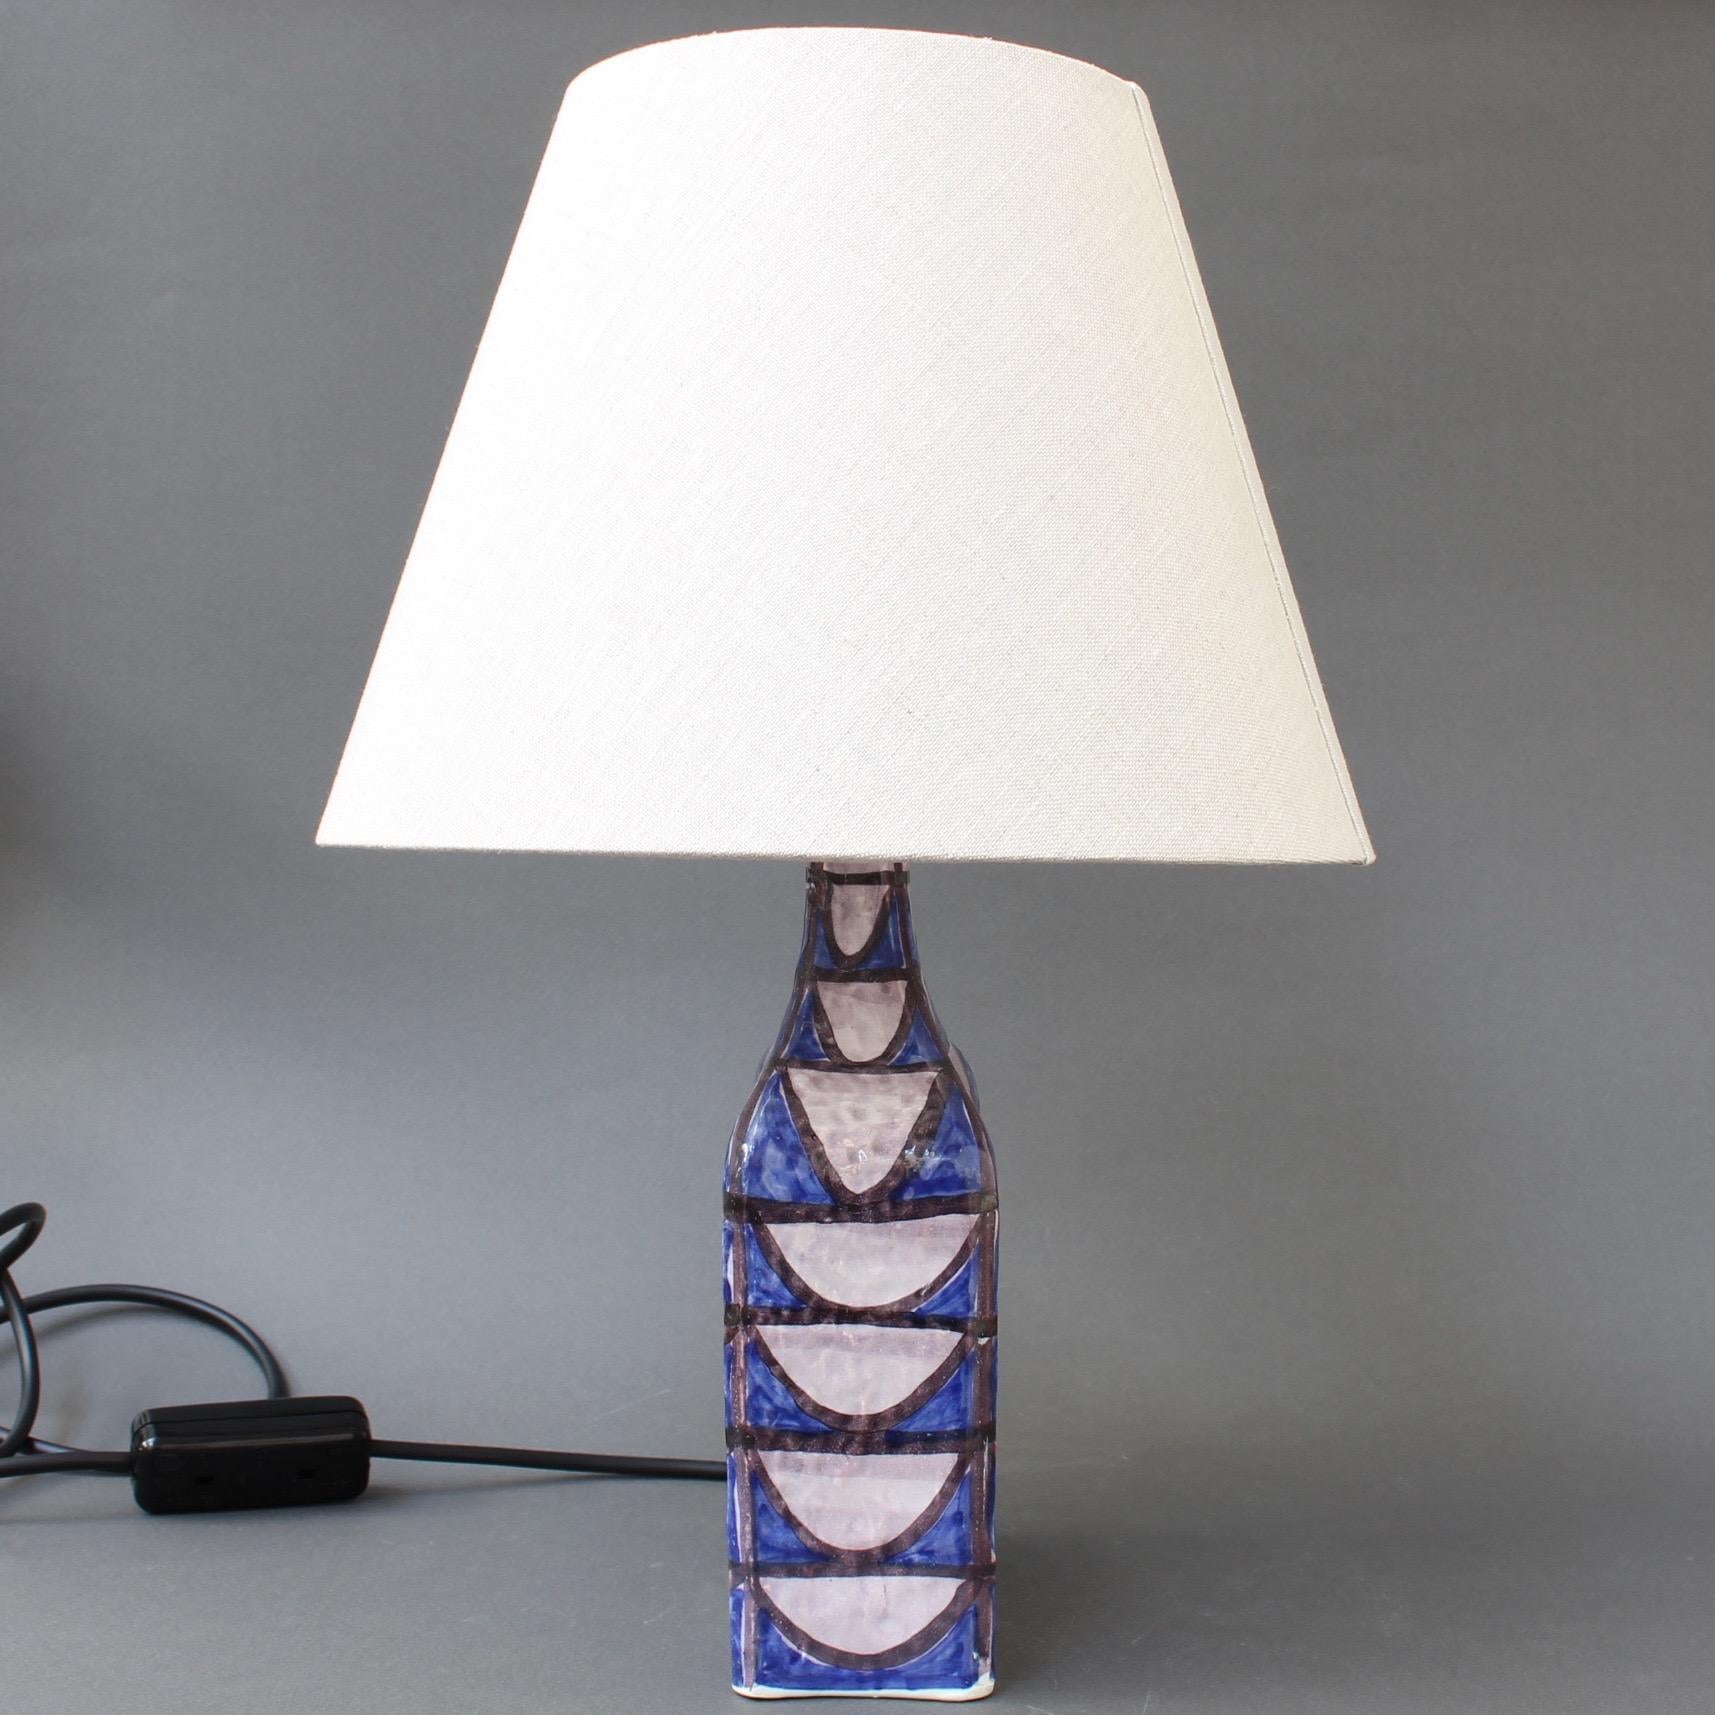 Vintage, Mid-Century Modern ceramic table lamp, circa 1950s by Alessio Tasca. Hand-painted studio ceramic with original design motif consisting of a series of elongated chalk-white semi-circles from the bottom to the neck over a base of deep blue.